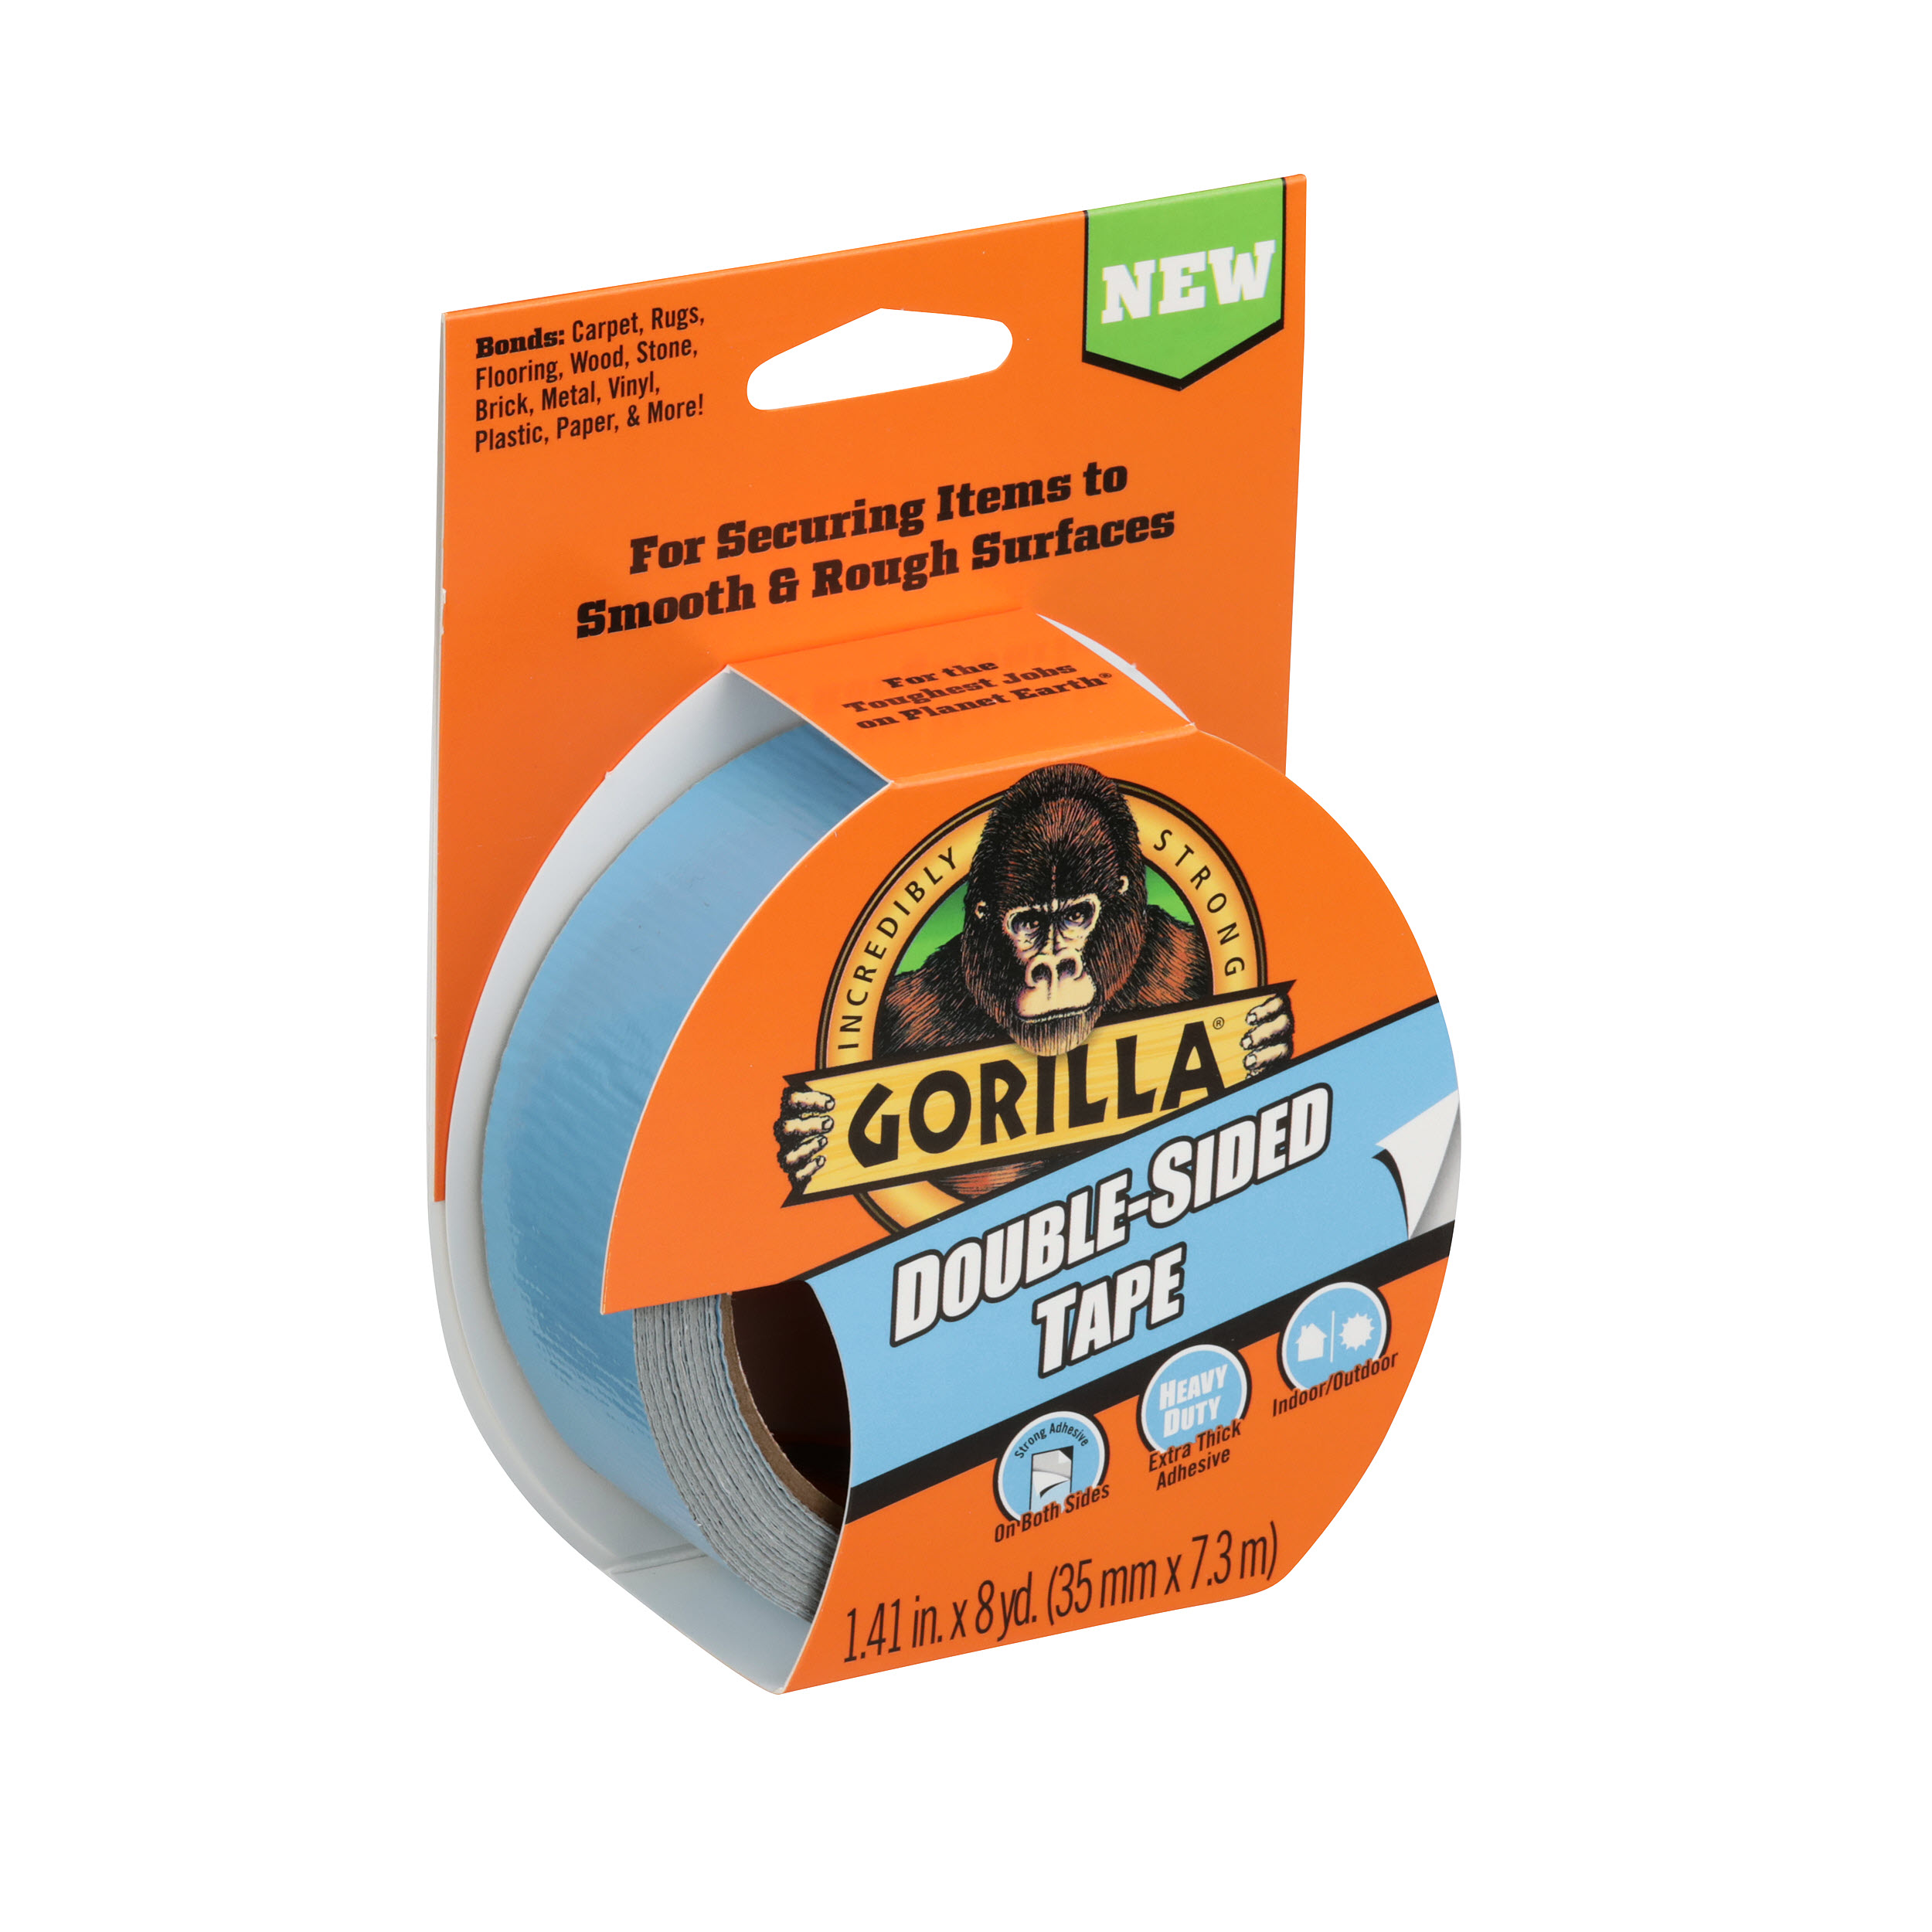 Gorilla Glue Double-Sided Tape, Gray Roll Assembled Product Weight 0.386 lb